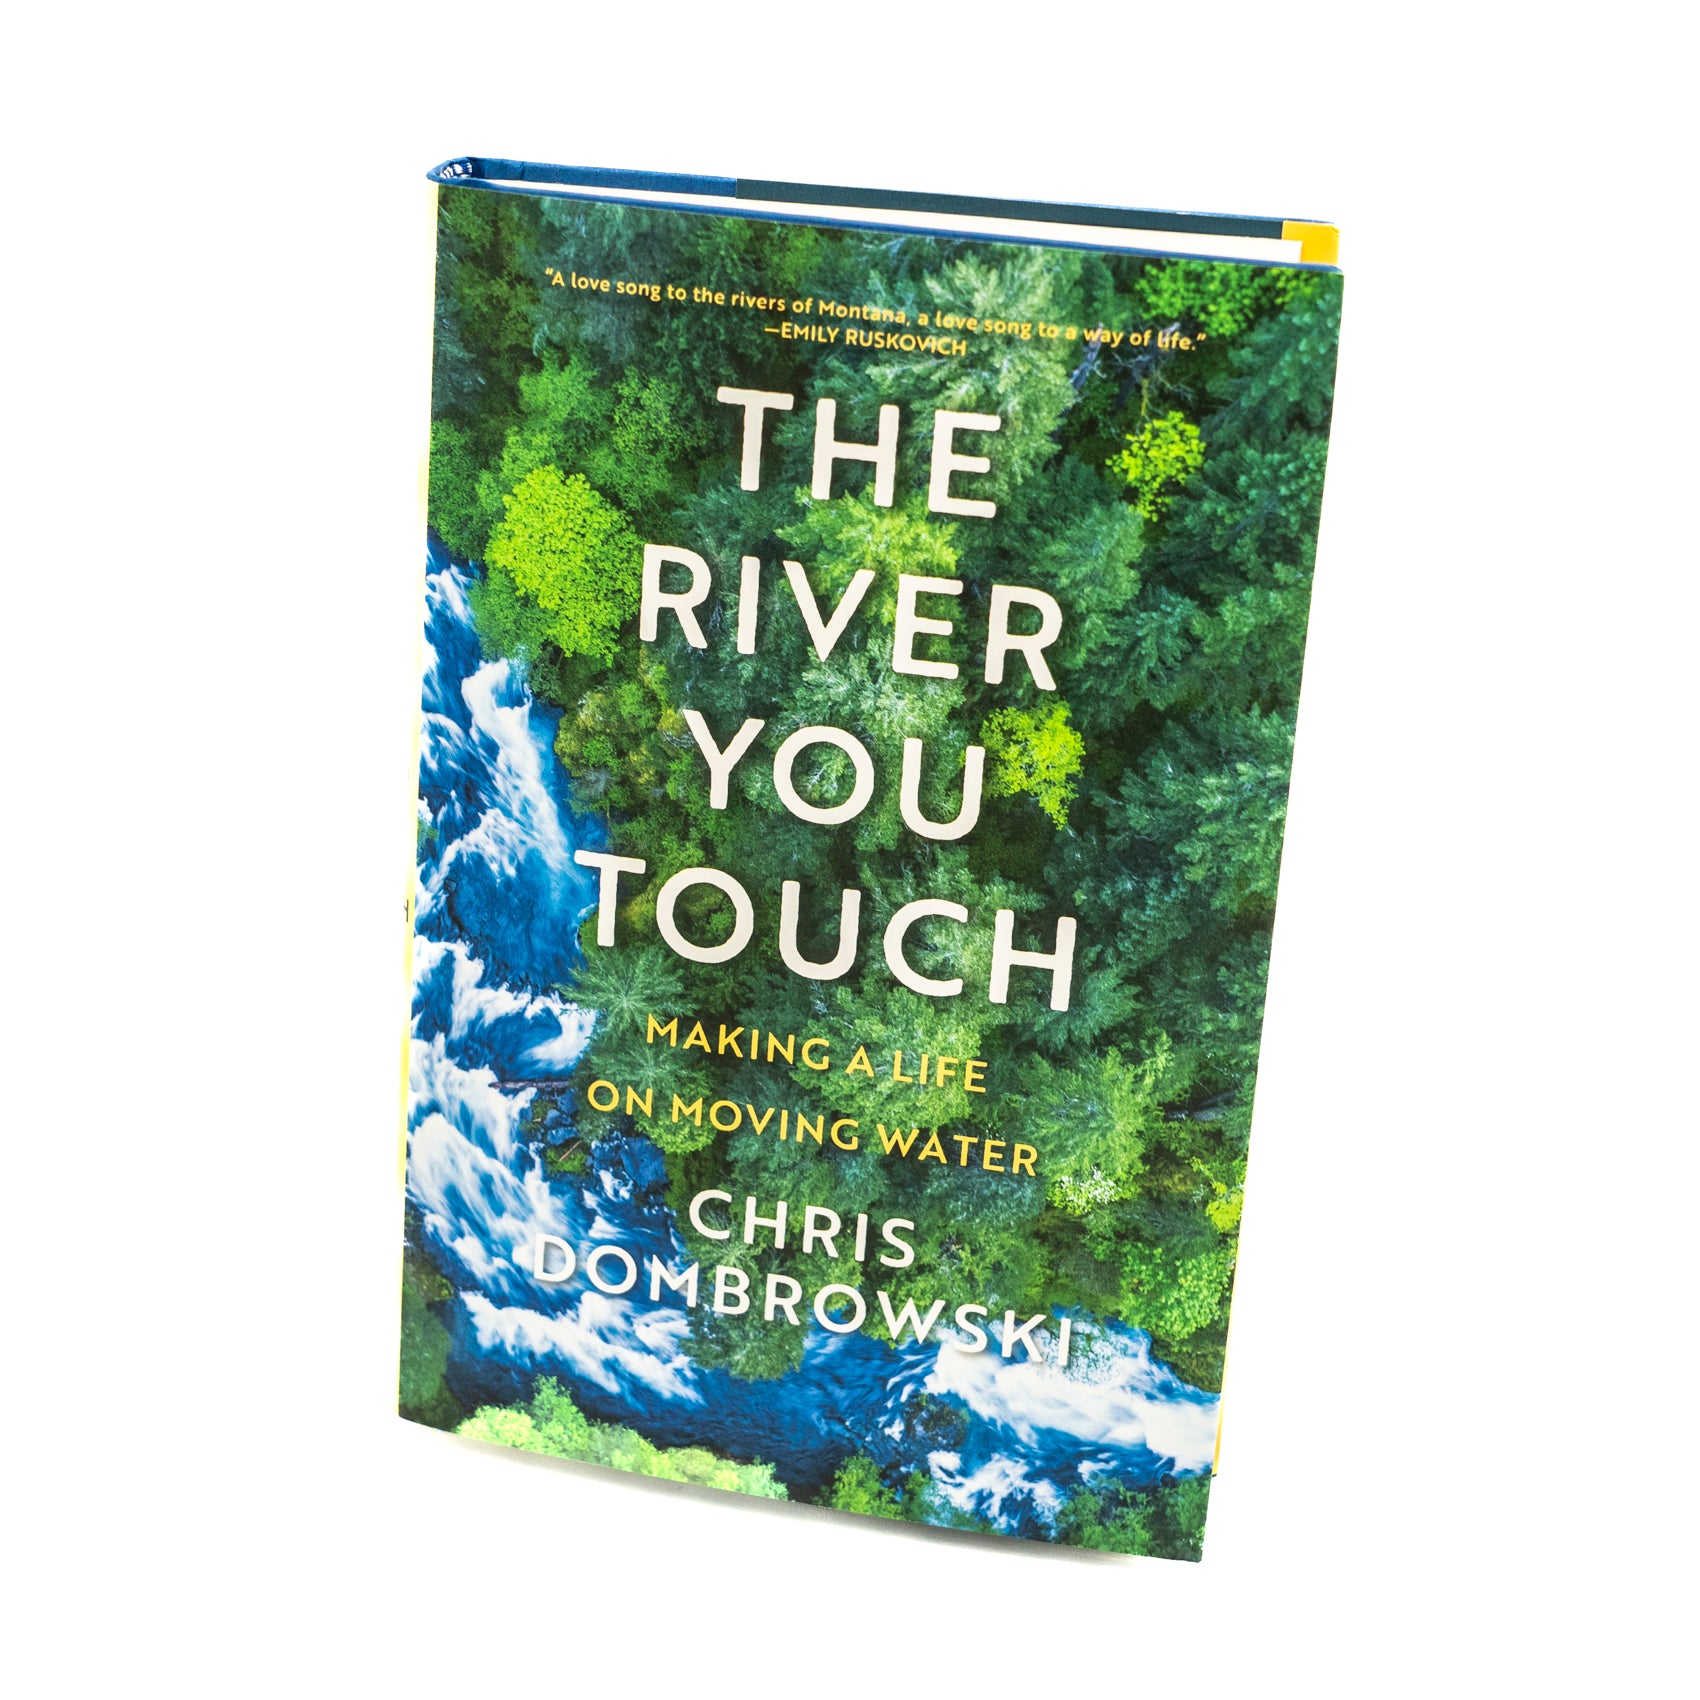 The River You Touch | Chris Dombrowski | Hardcover